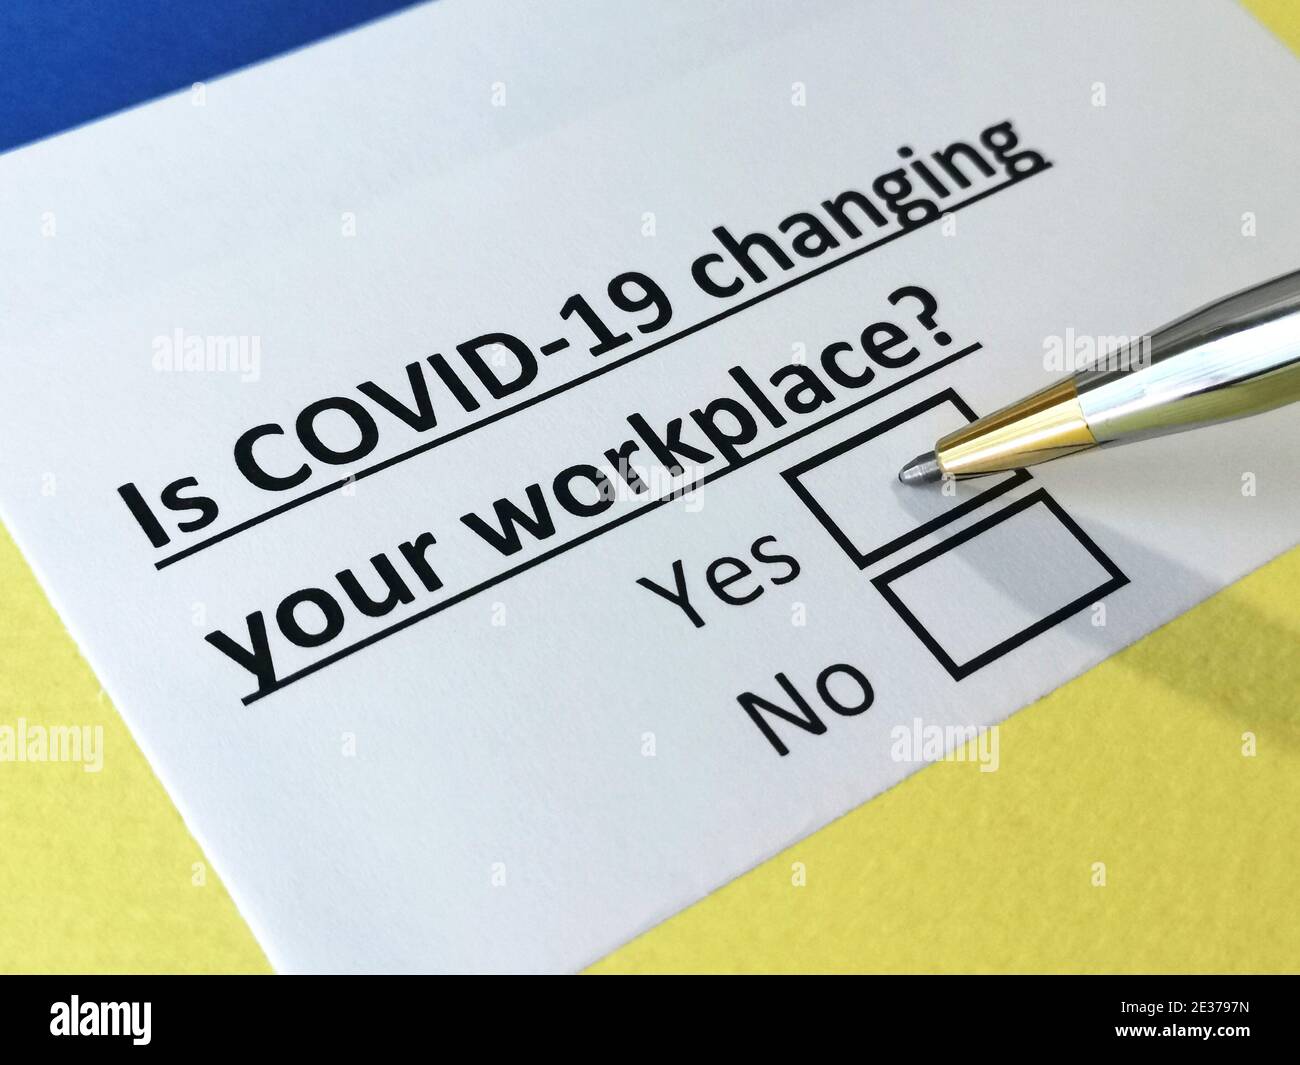 One person is answering question about covid-19 effects on  workplace. Stock Photo